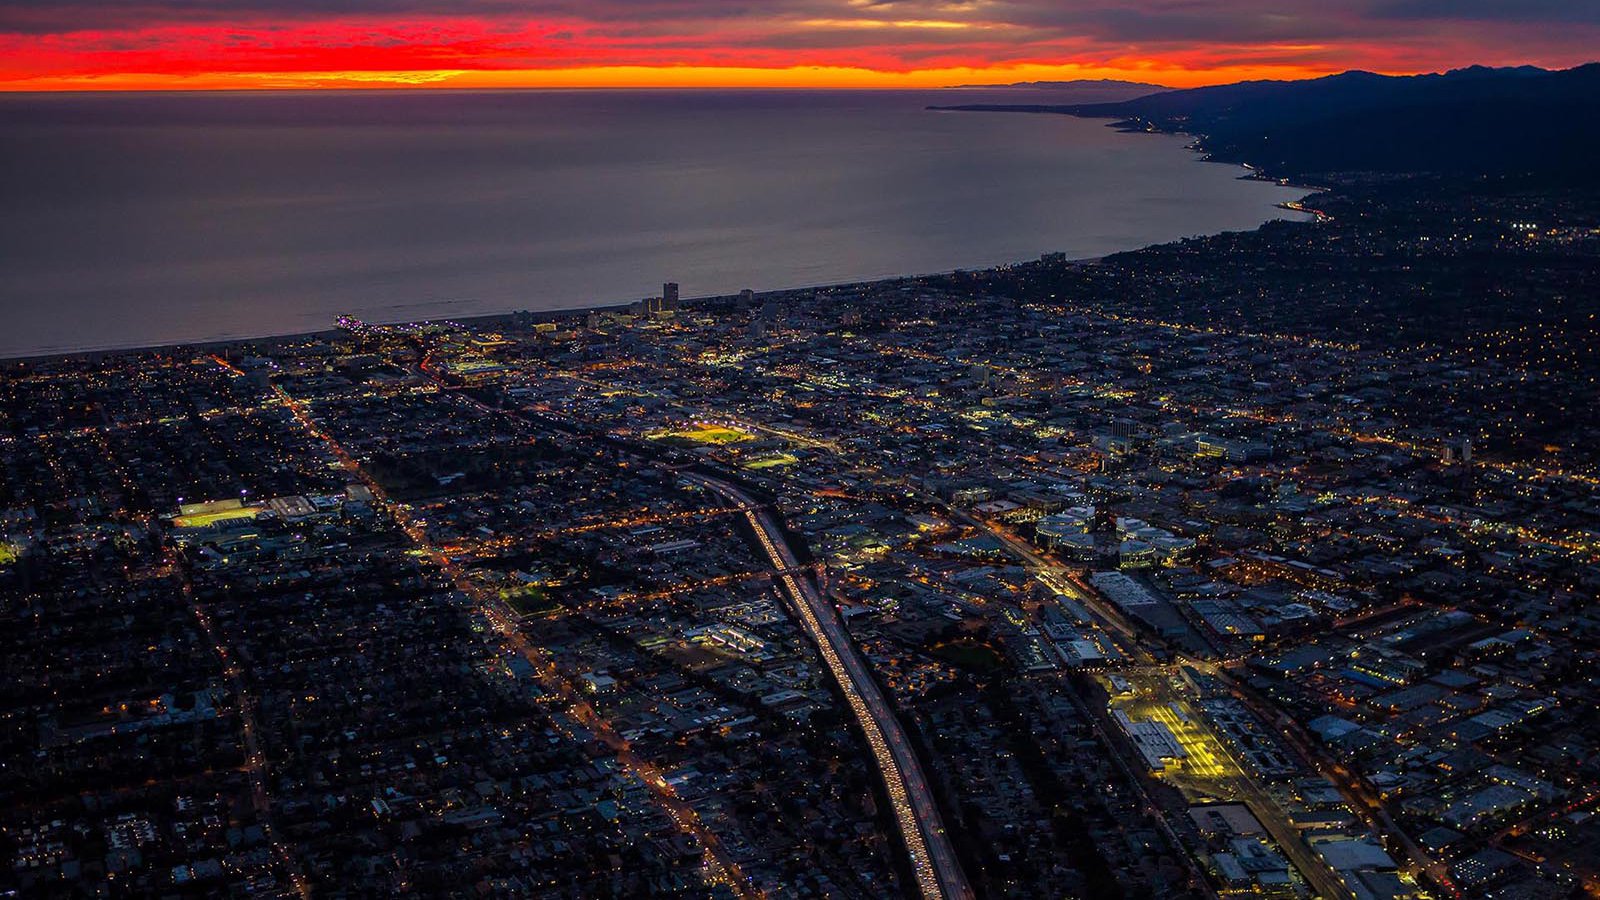 Aerial cityscape of the Santa Monica Bay at Sunset with Santa Cruz Island in the distance